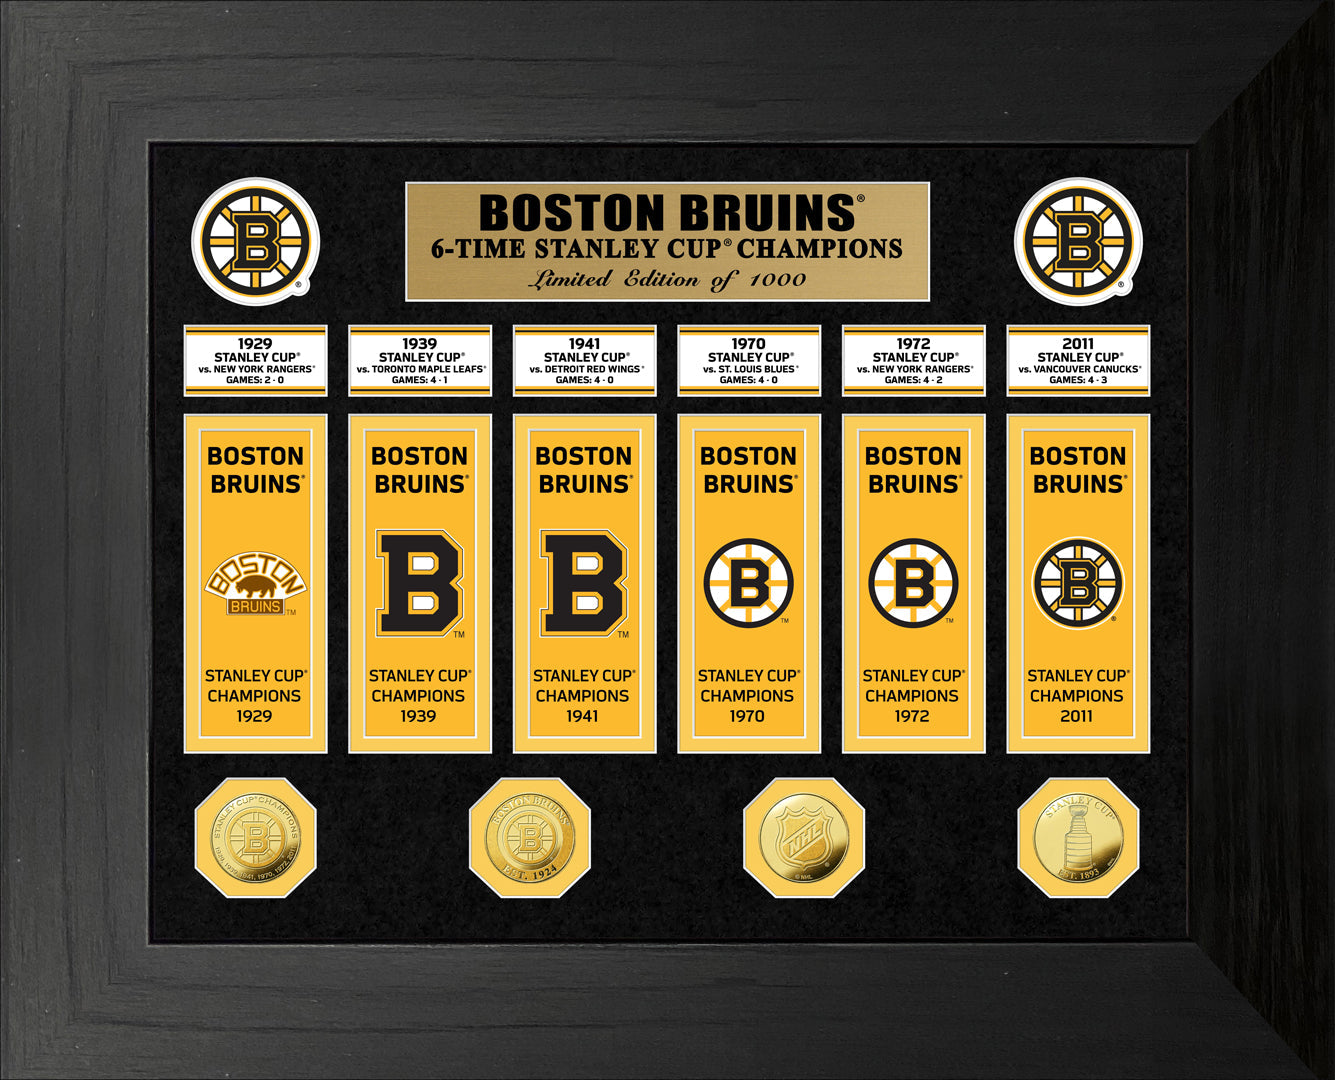 Boston Bruins 6-Time Stanley Cup Champions Deluxe Gold Coin & Banner Collection